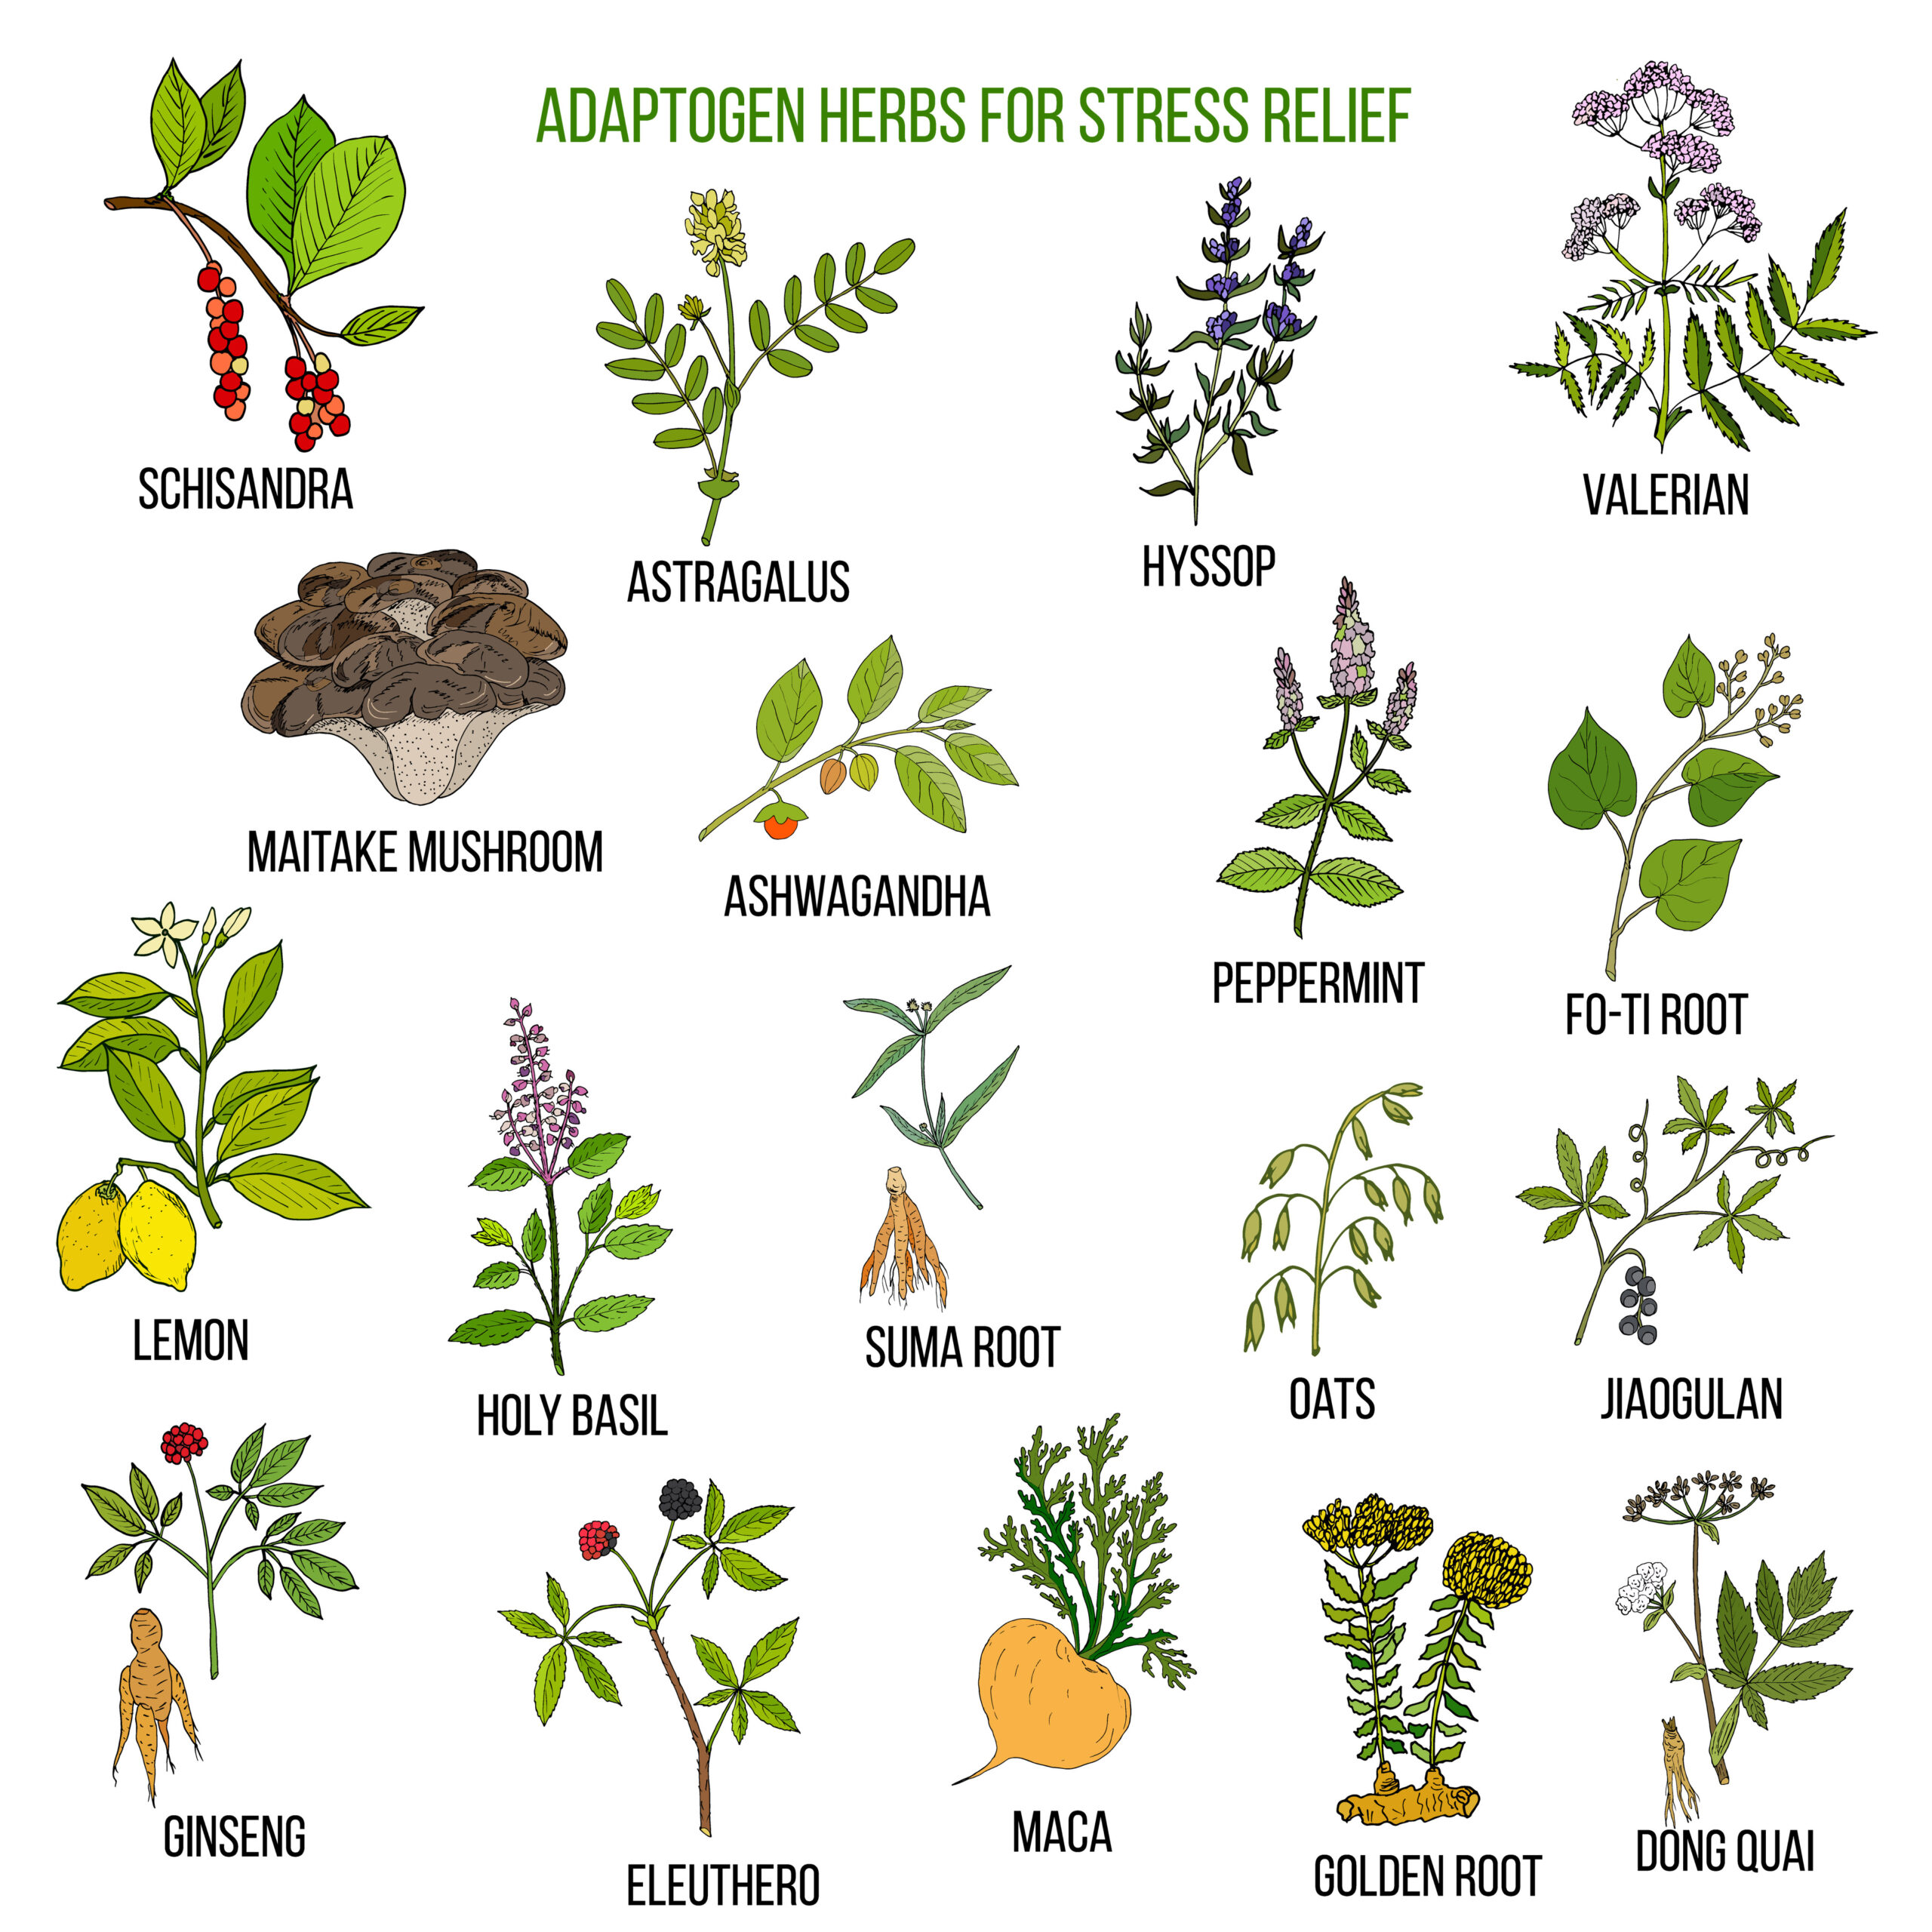 Adaptogenic herbs for stress relief